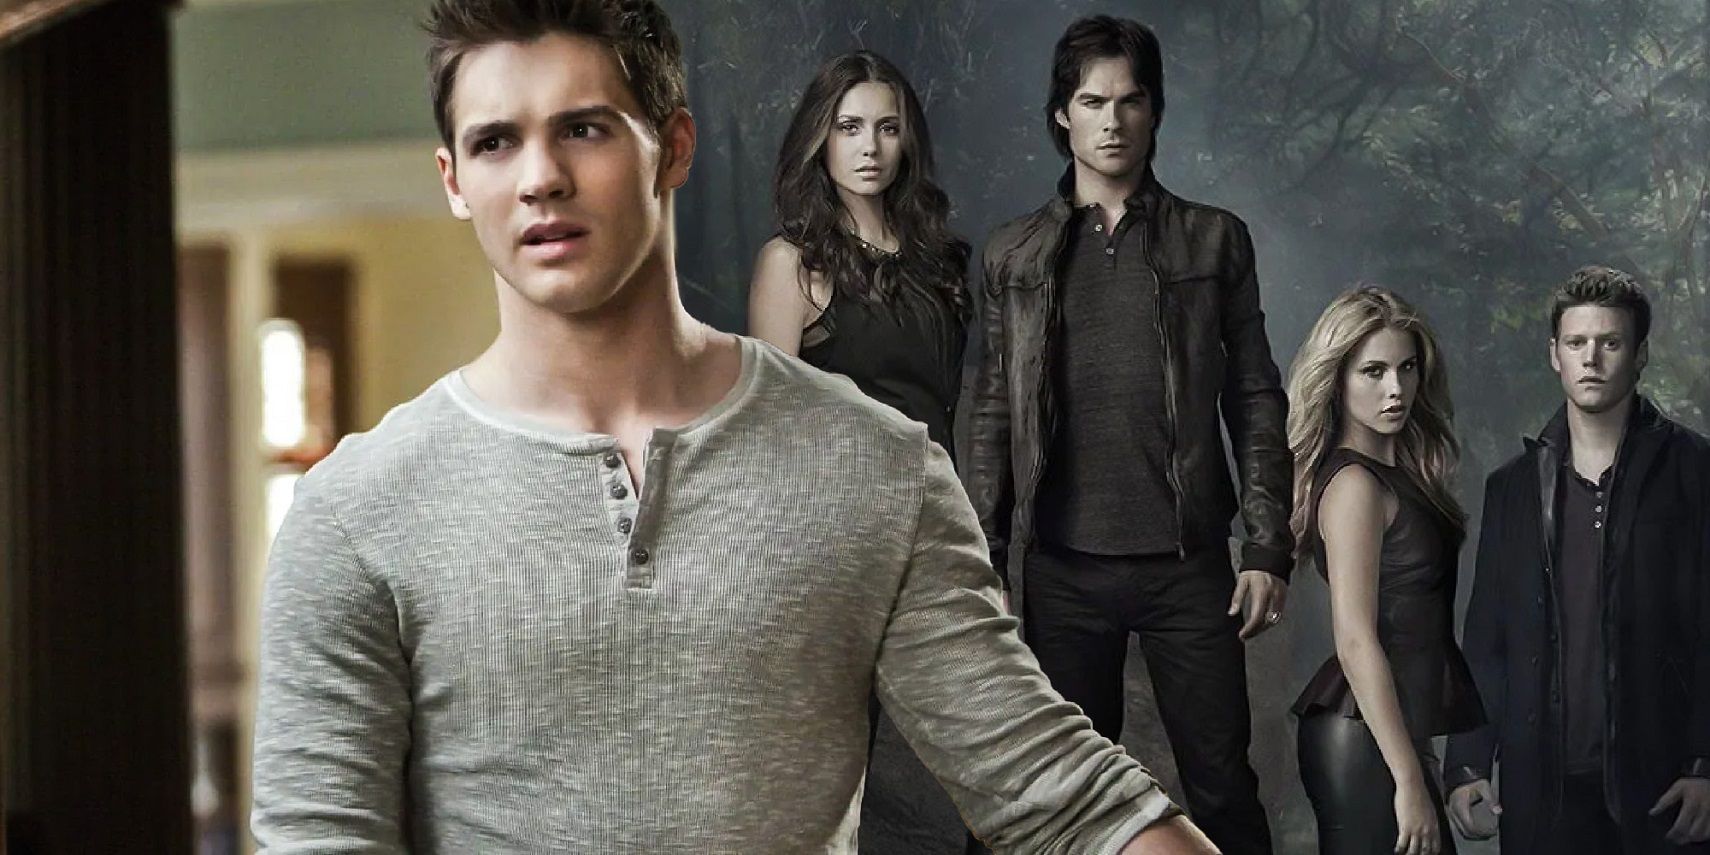 Vampire Diaries: What Happened To Jeremy Gilbert After The Show Steven R. McQueen